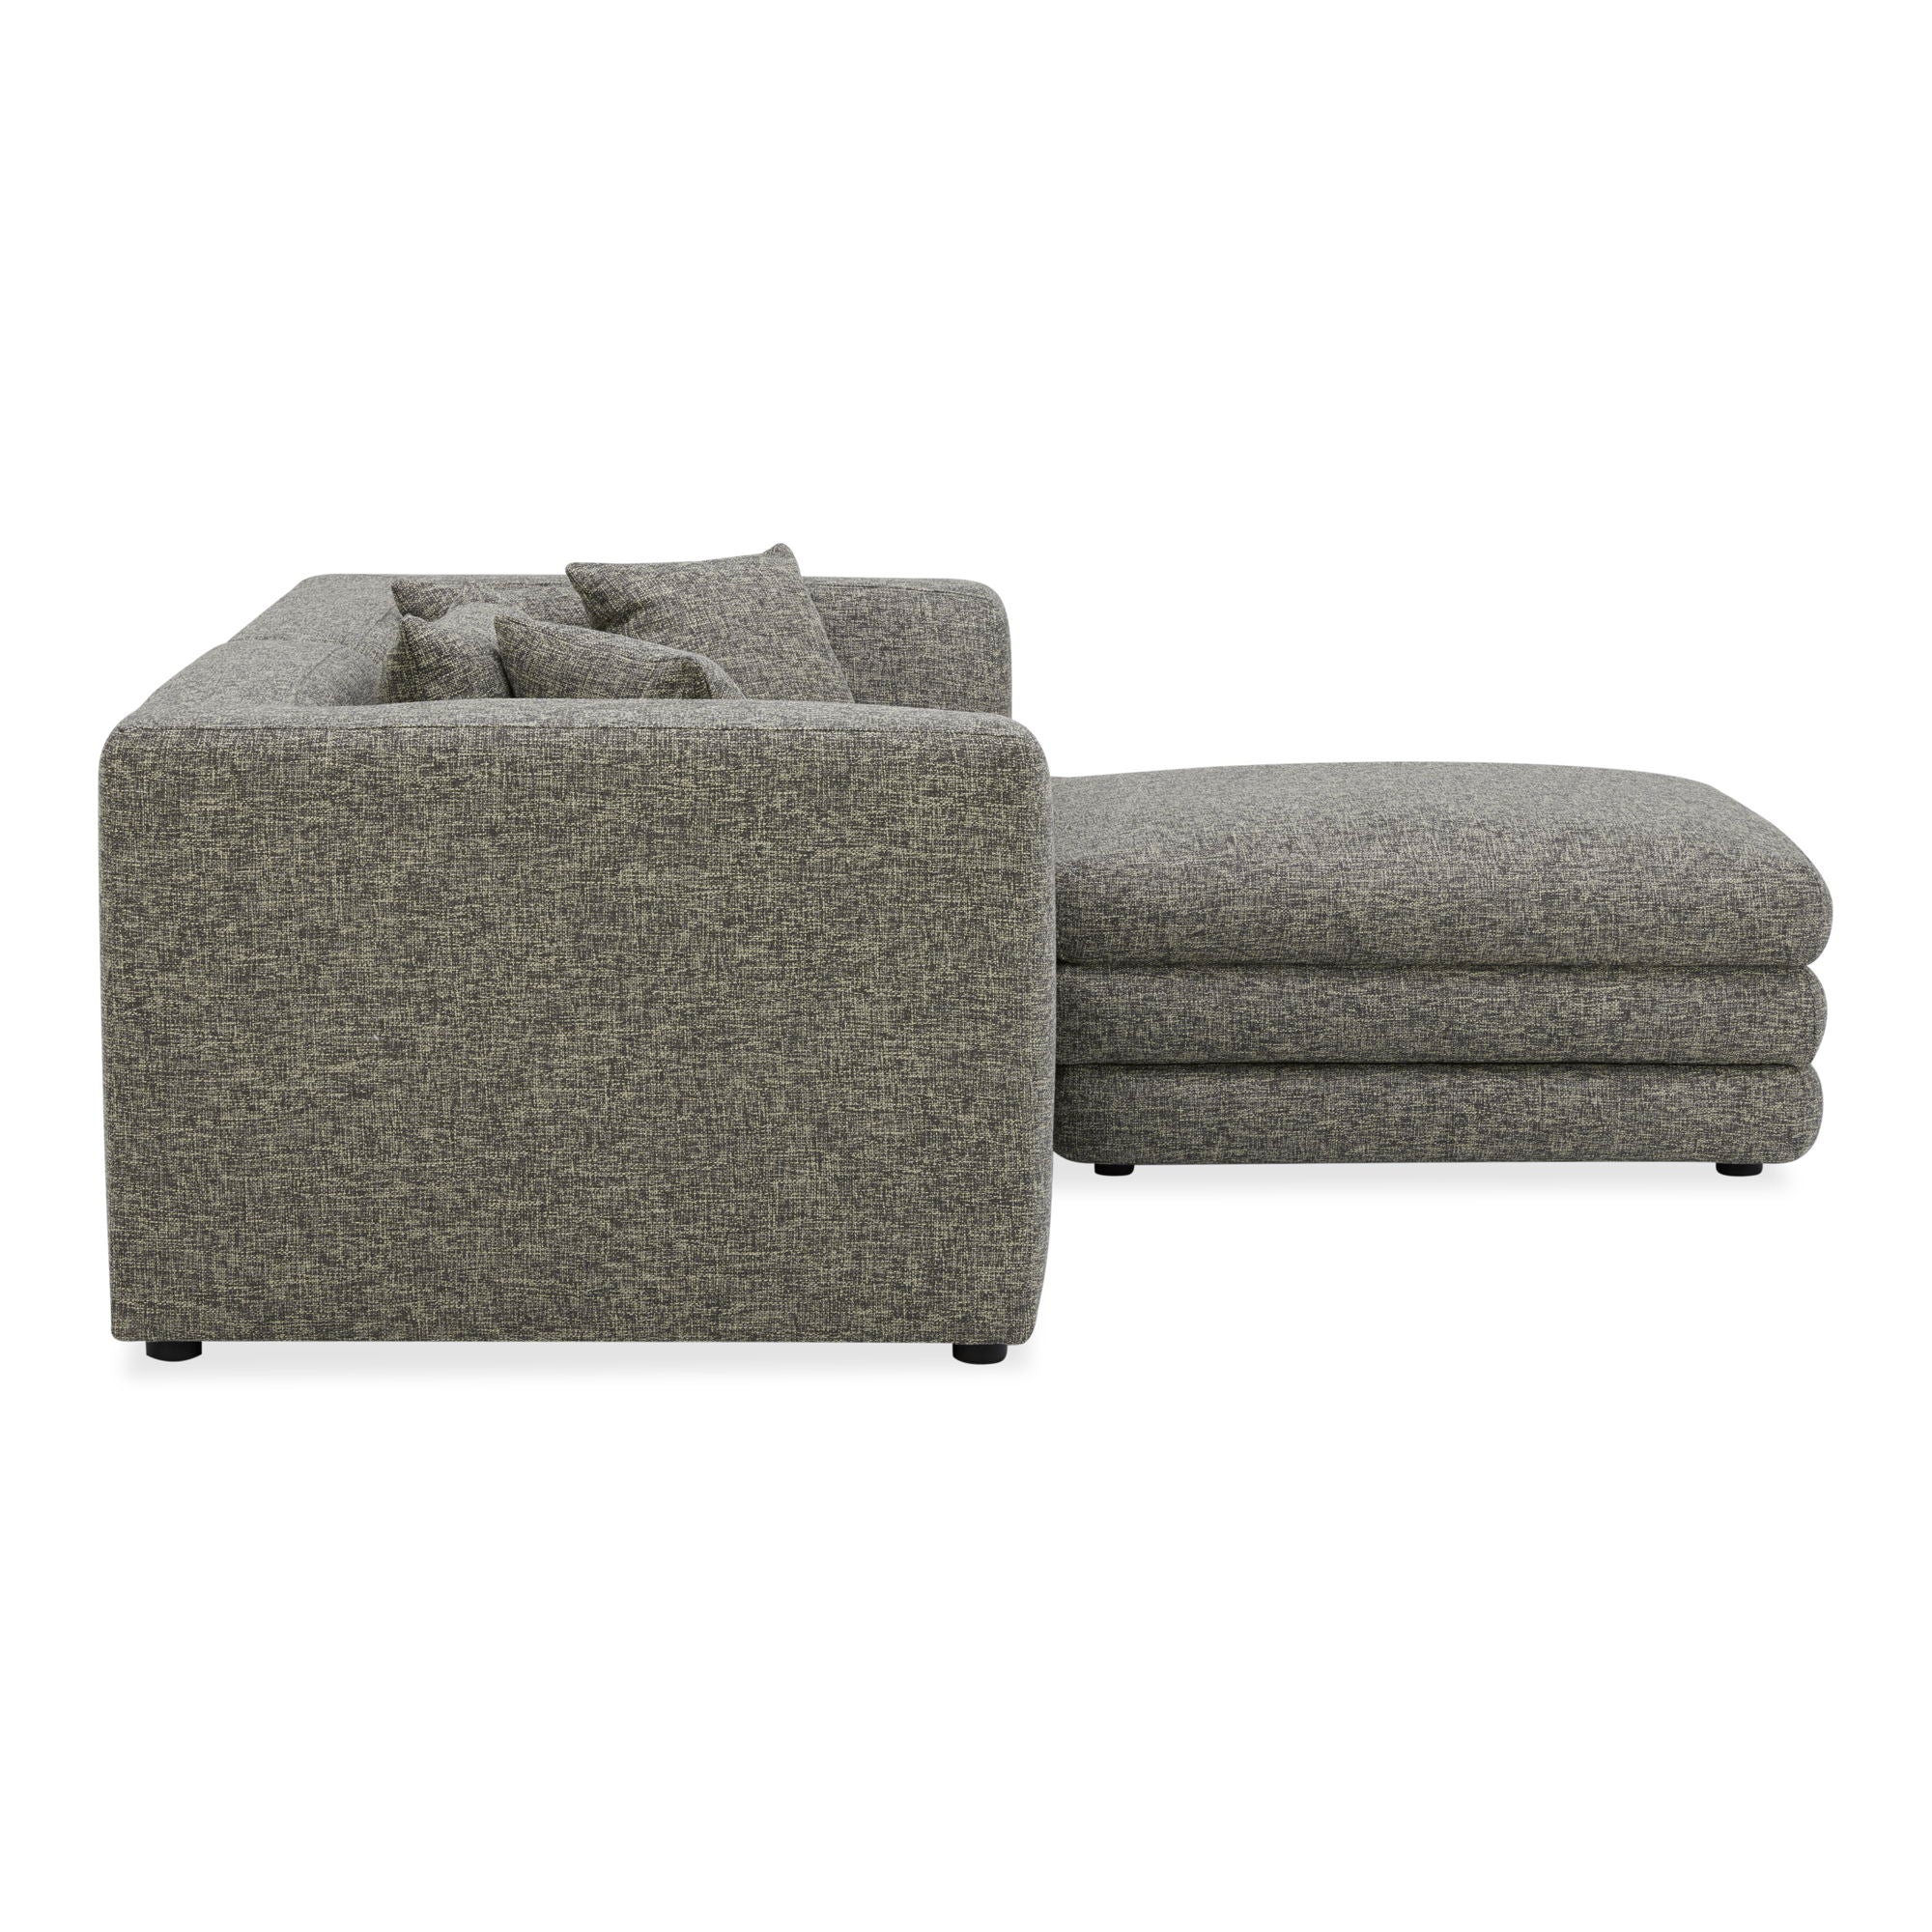 Lowtide - Nook Modular Sectional - Surie Shadow